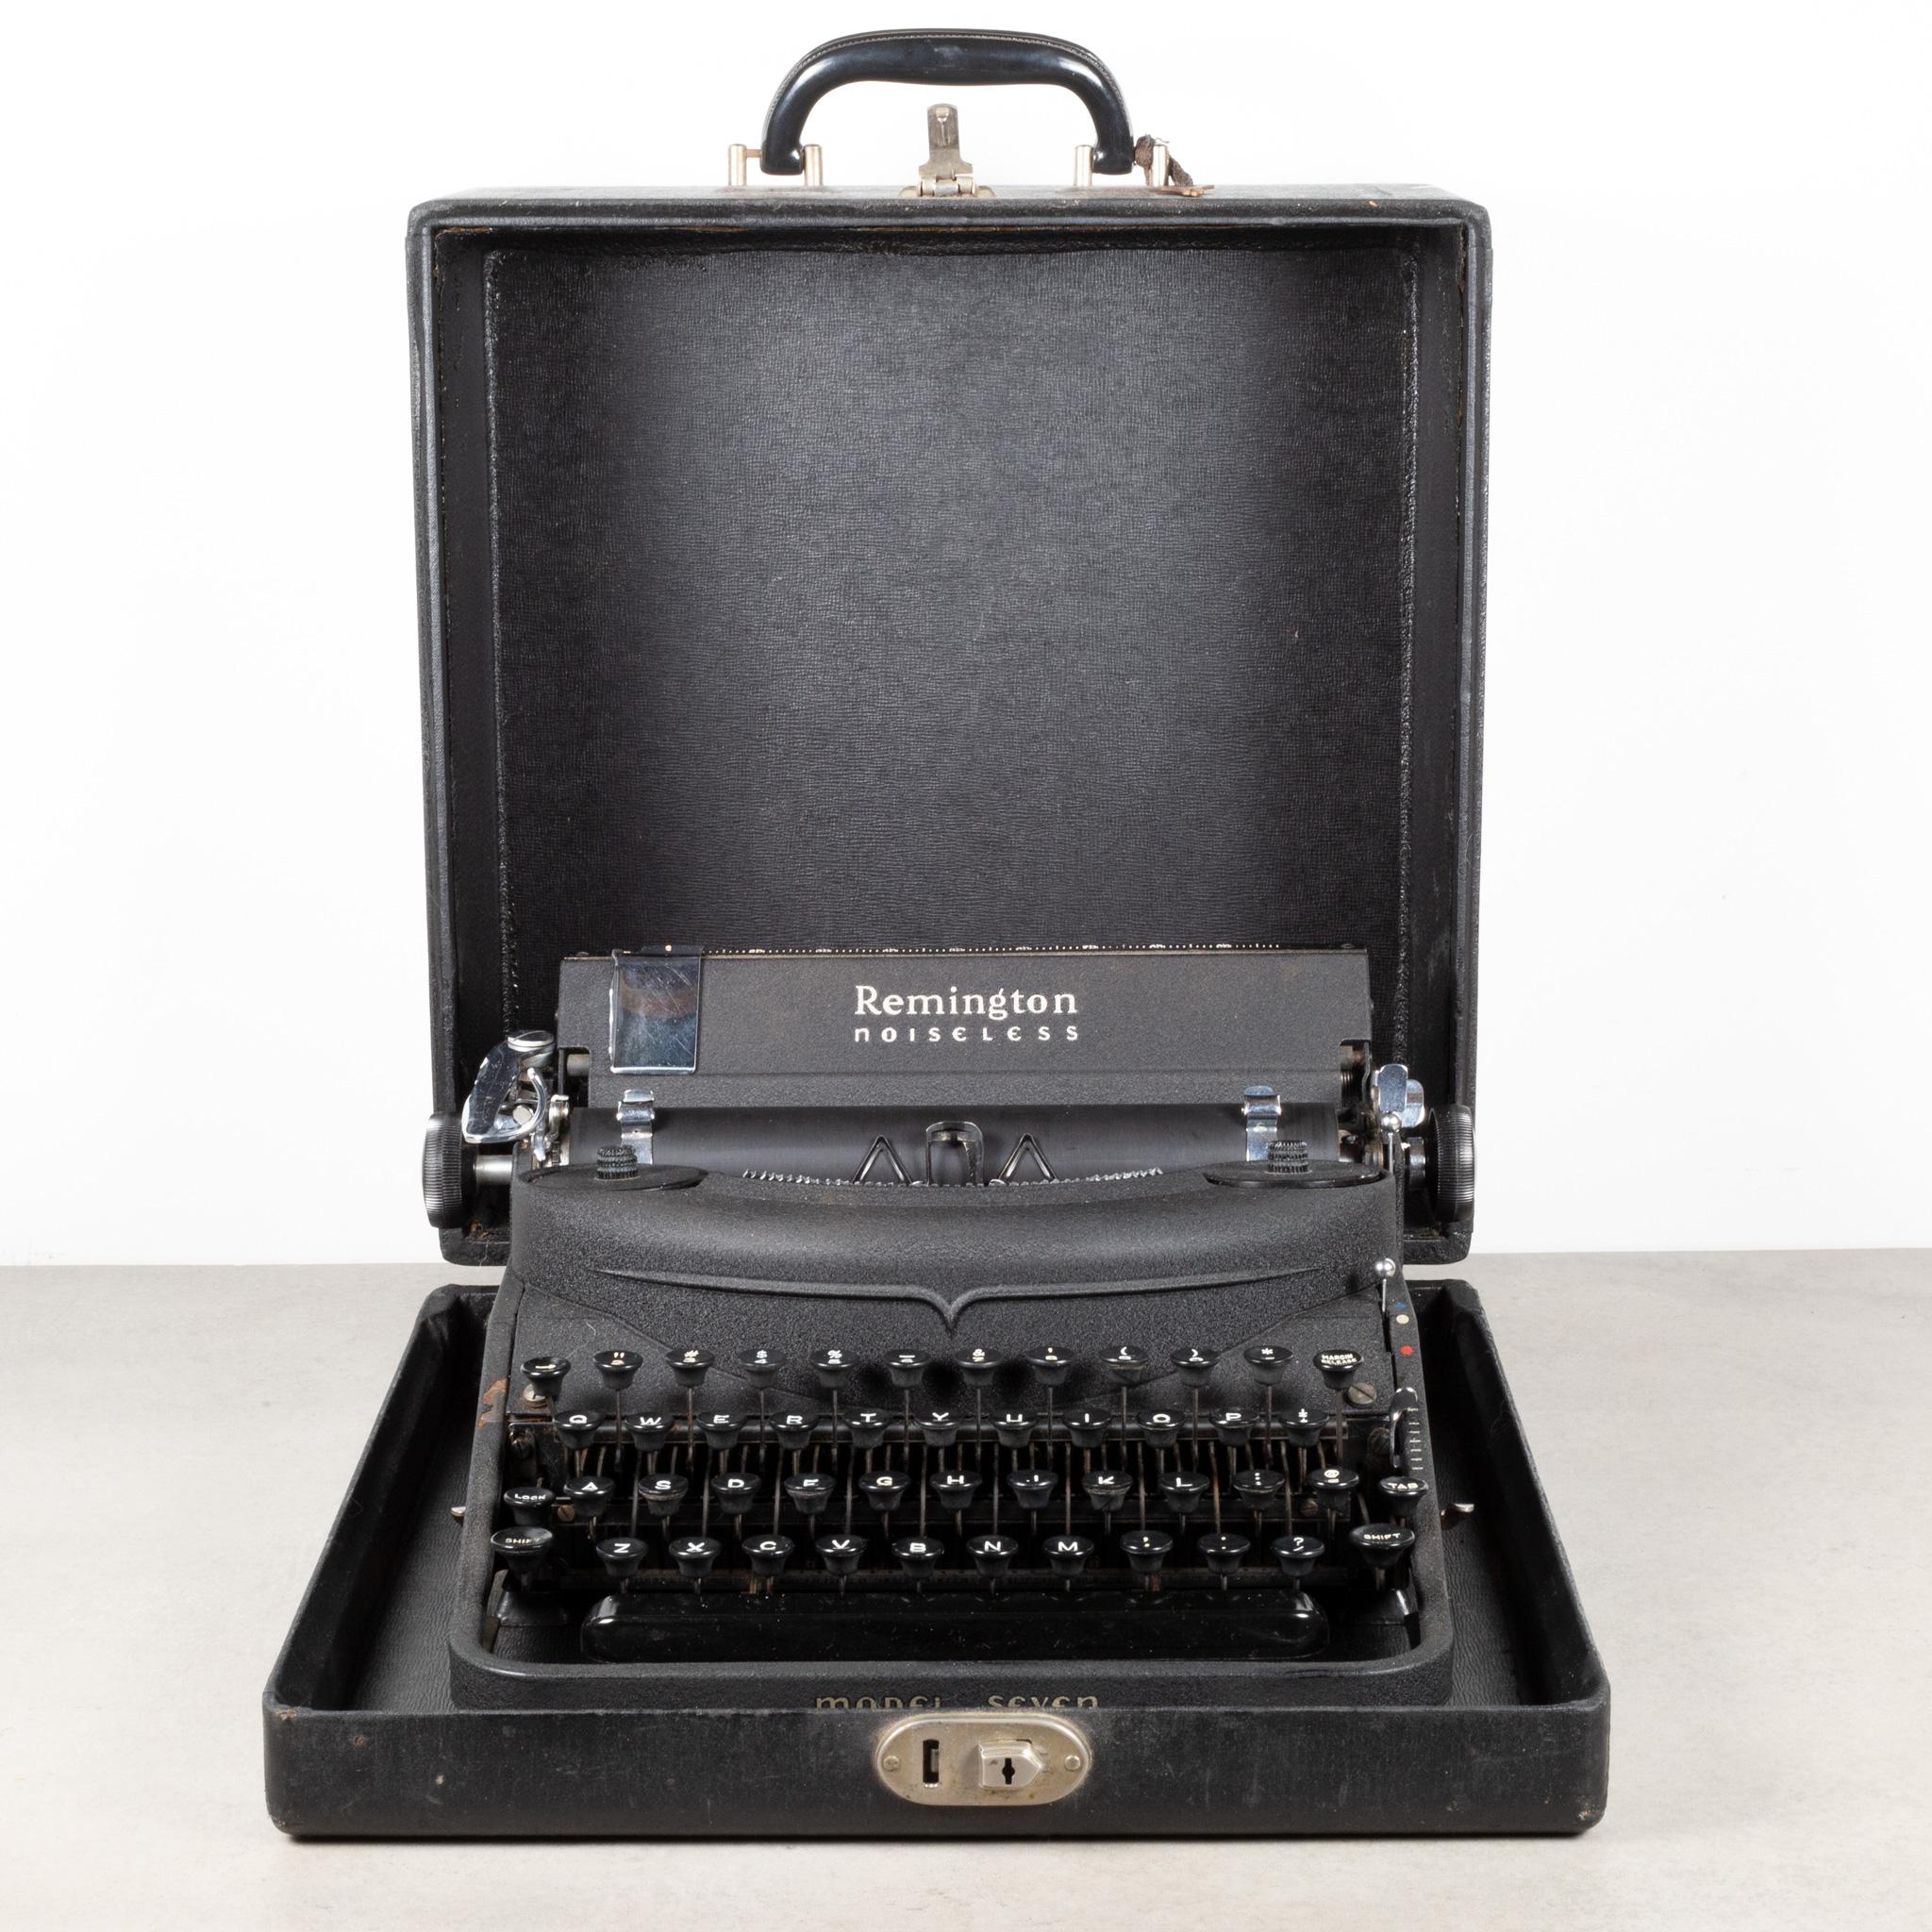 ABOUT

An original Remington Rand Noiseless Portable Typewriter with black crinkle finish and original case. This typewriter is very clean. It has smooth typing and the carriage advances and functions very well. The ribbon is new and has been